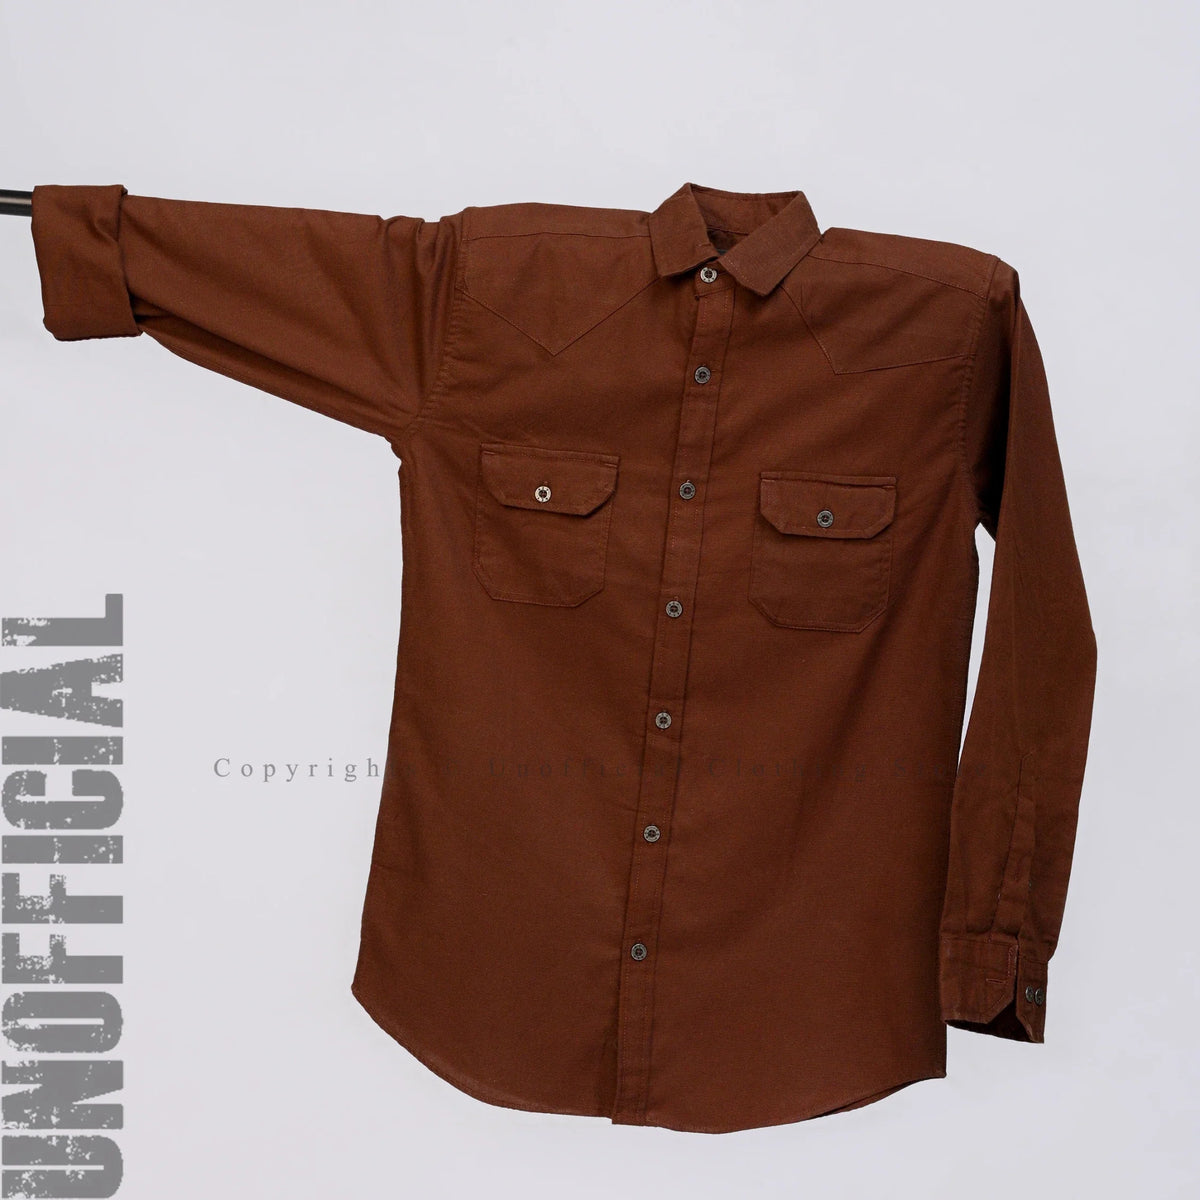 COFFEE BROWN-DOUBLE POCKET SHIRT